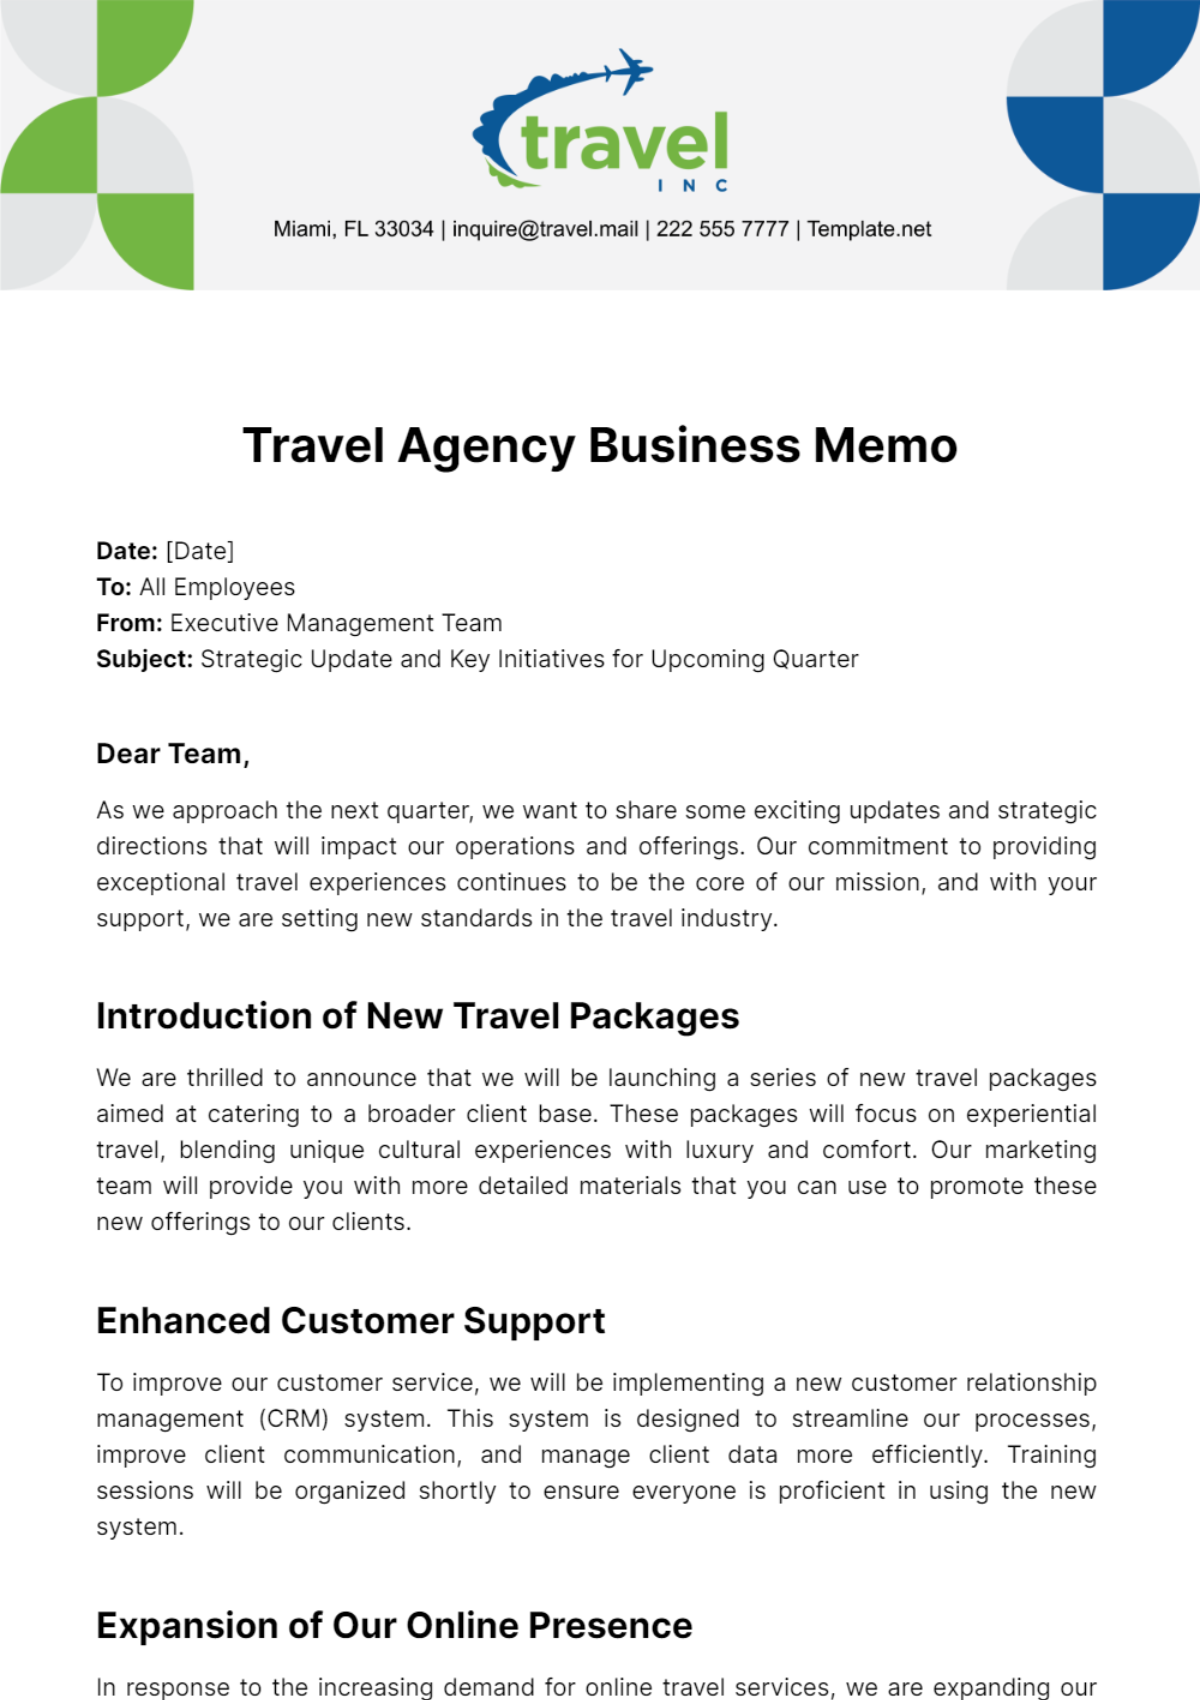 Travel Agency Business Memo Template